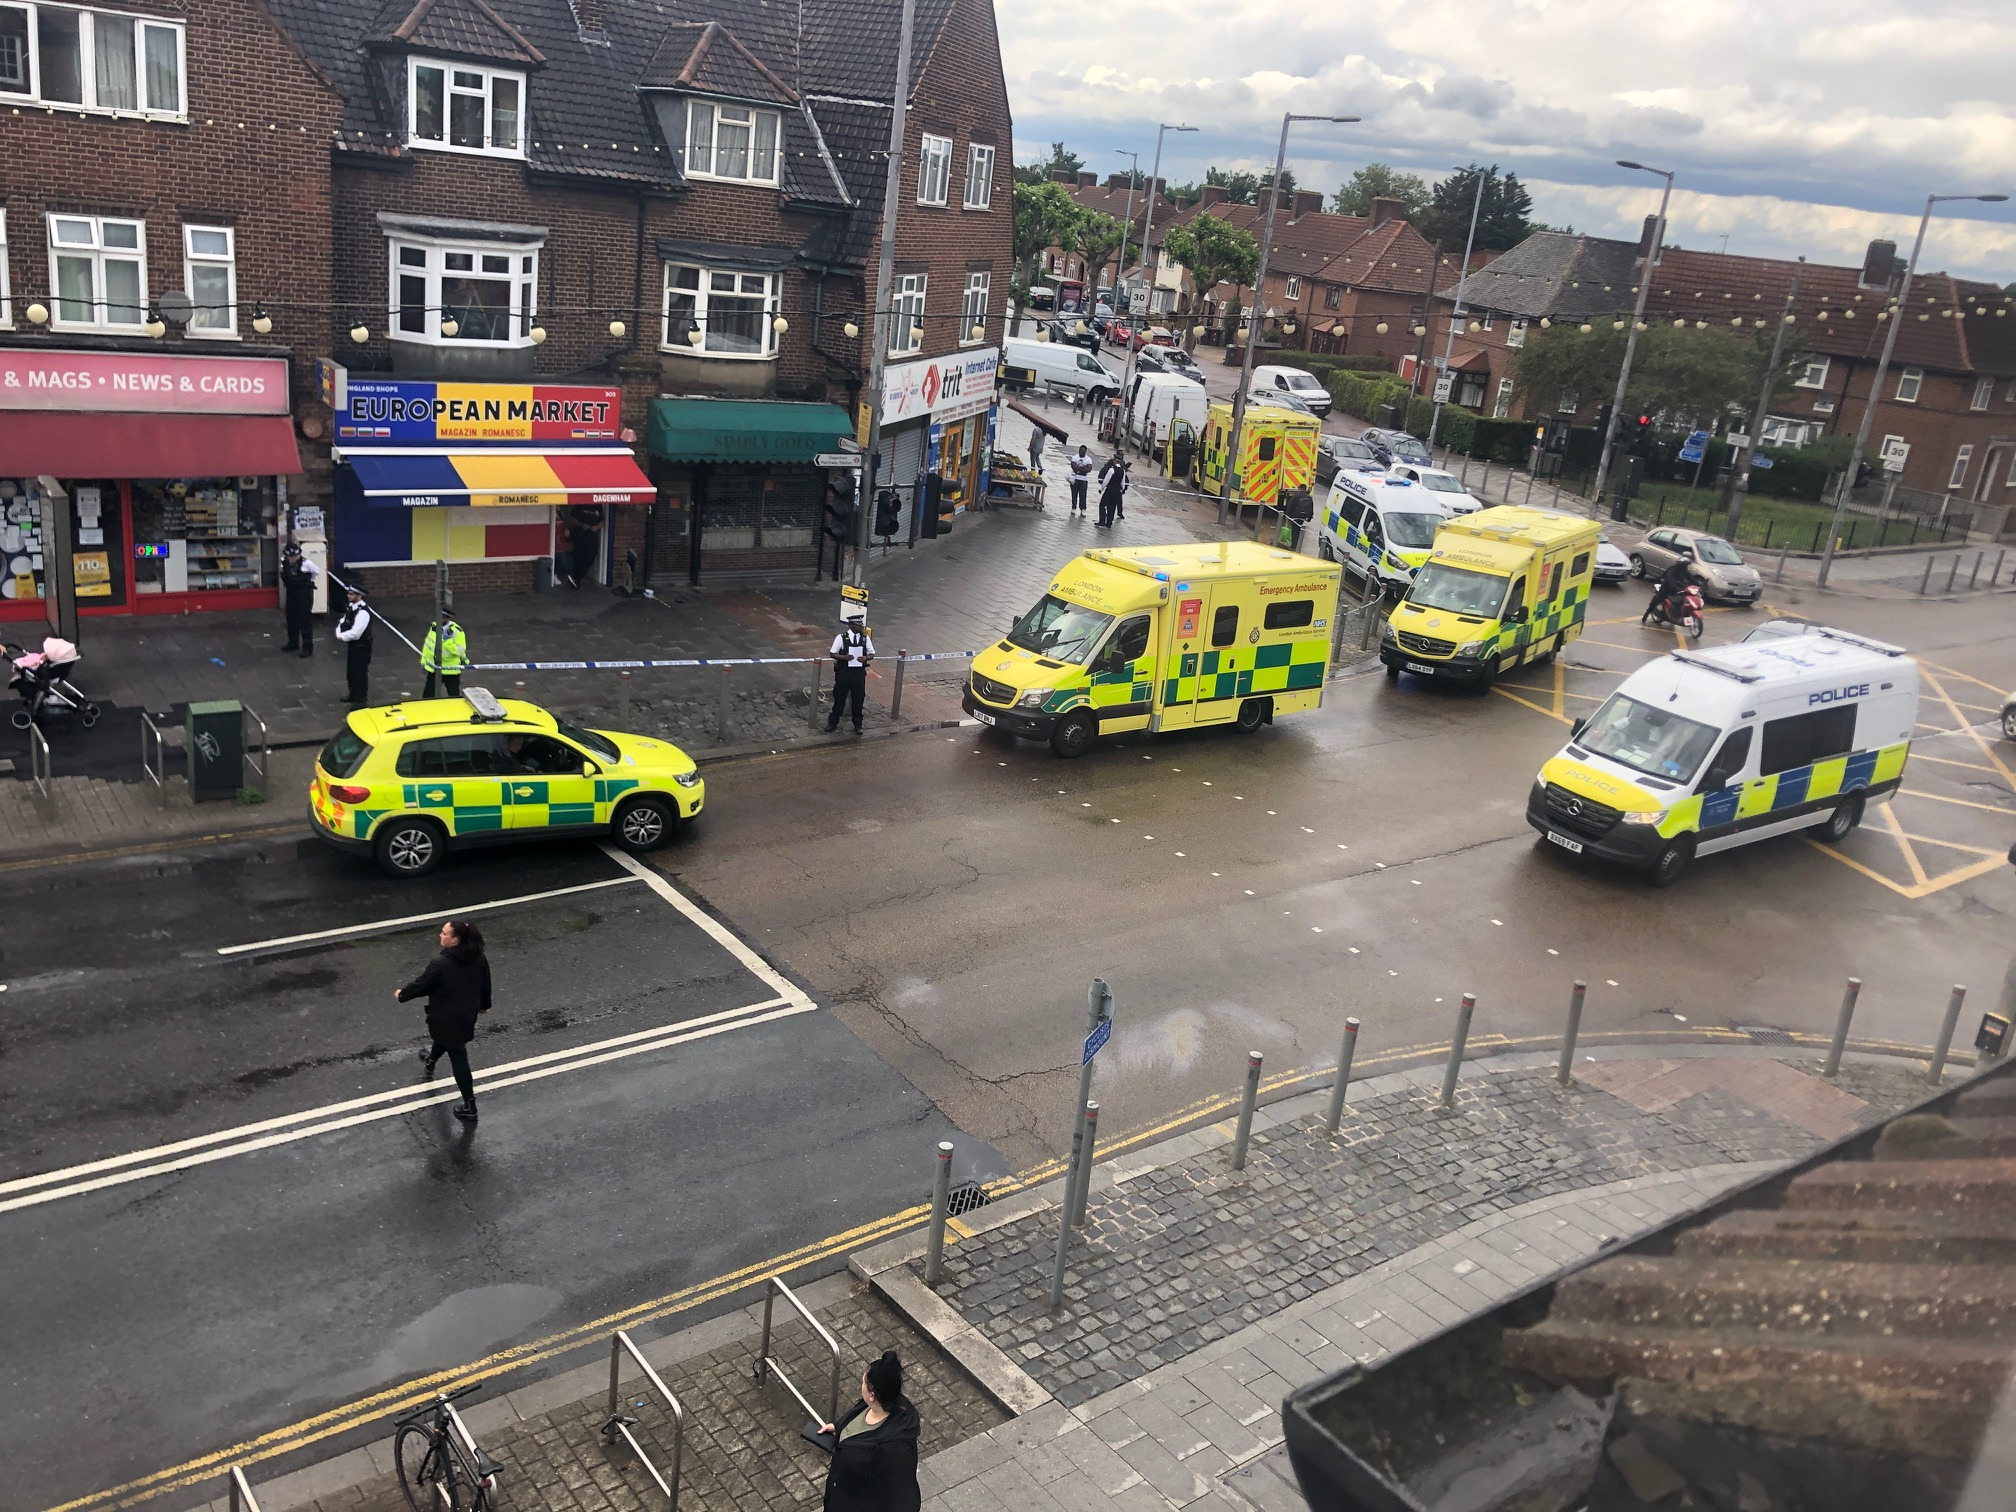 Woman In Hospital After Being Found Injured In Dagenham Heathway Time 107 5 Fm Time 107 5 Fm